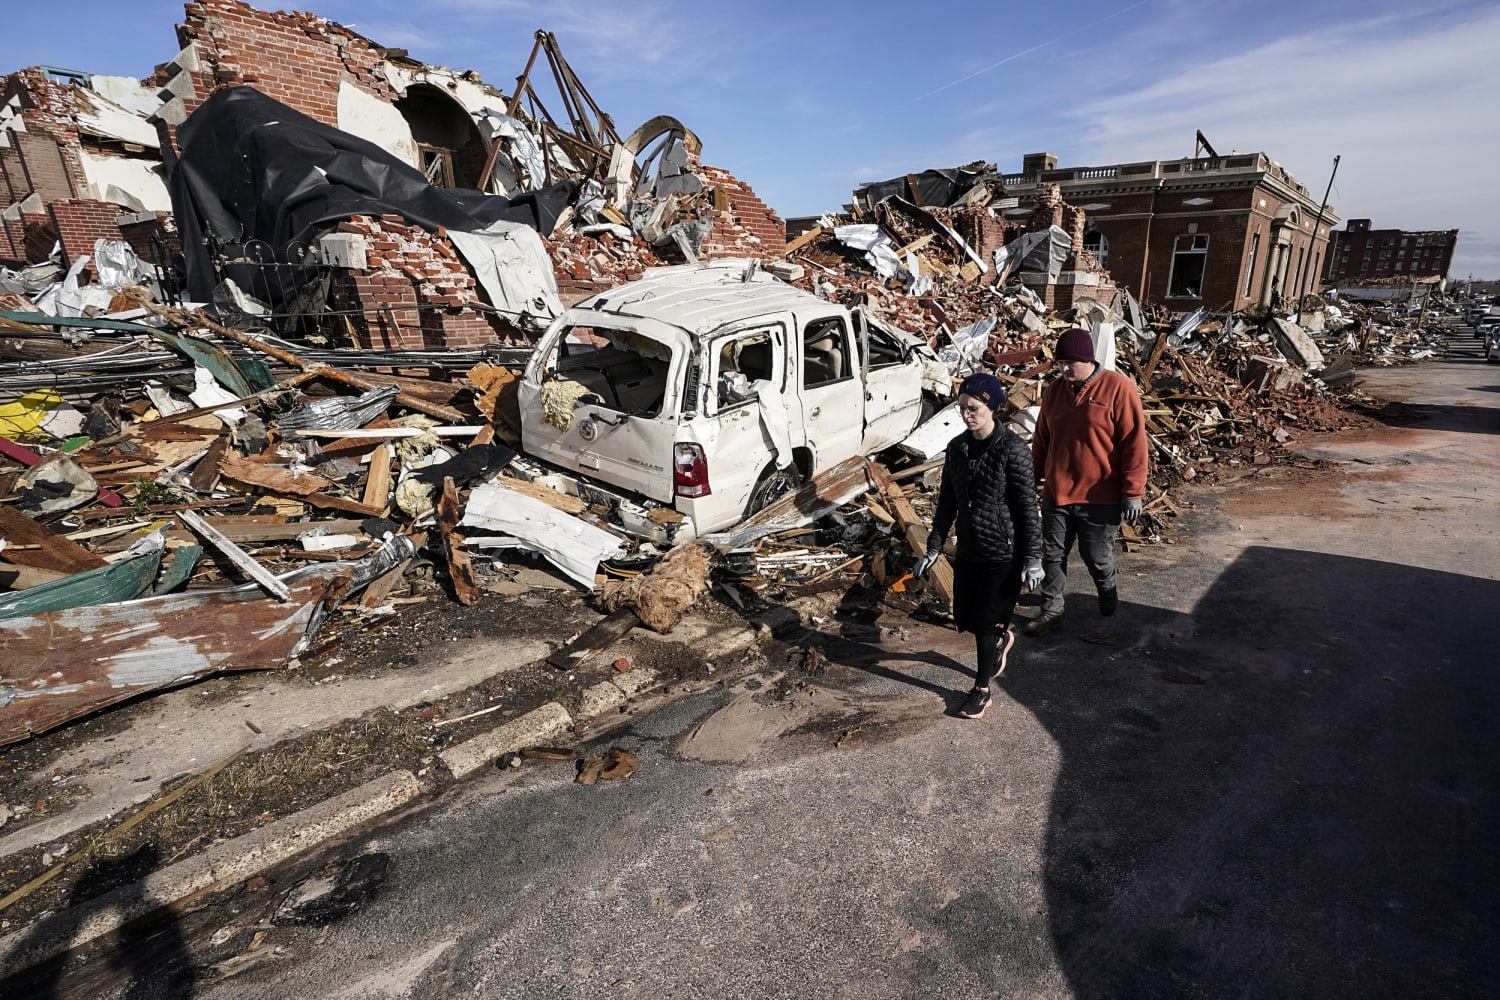 Biden directs immediate surge of federal resources to states hit by deadly tornadoes